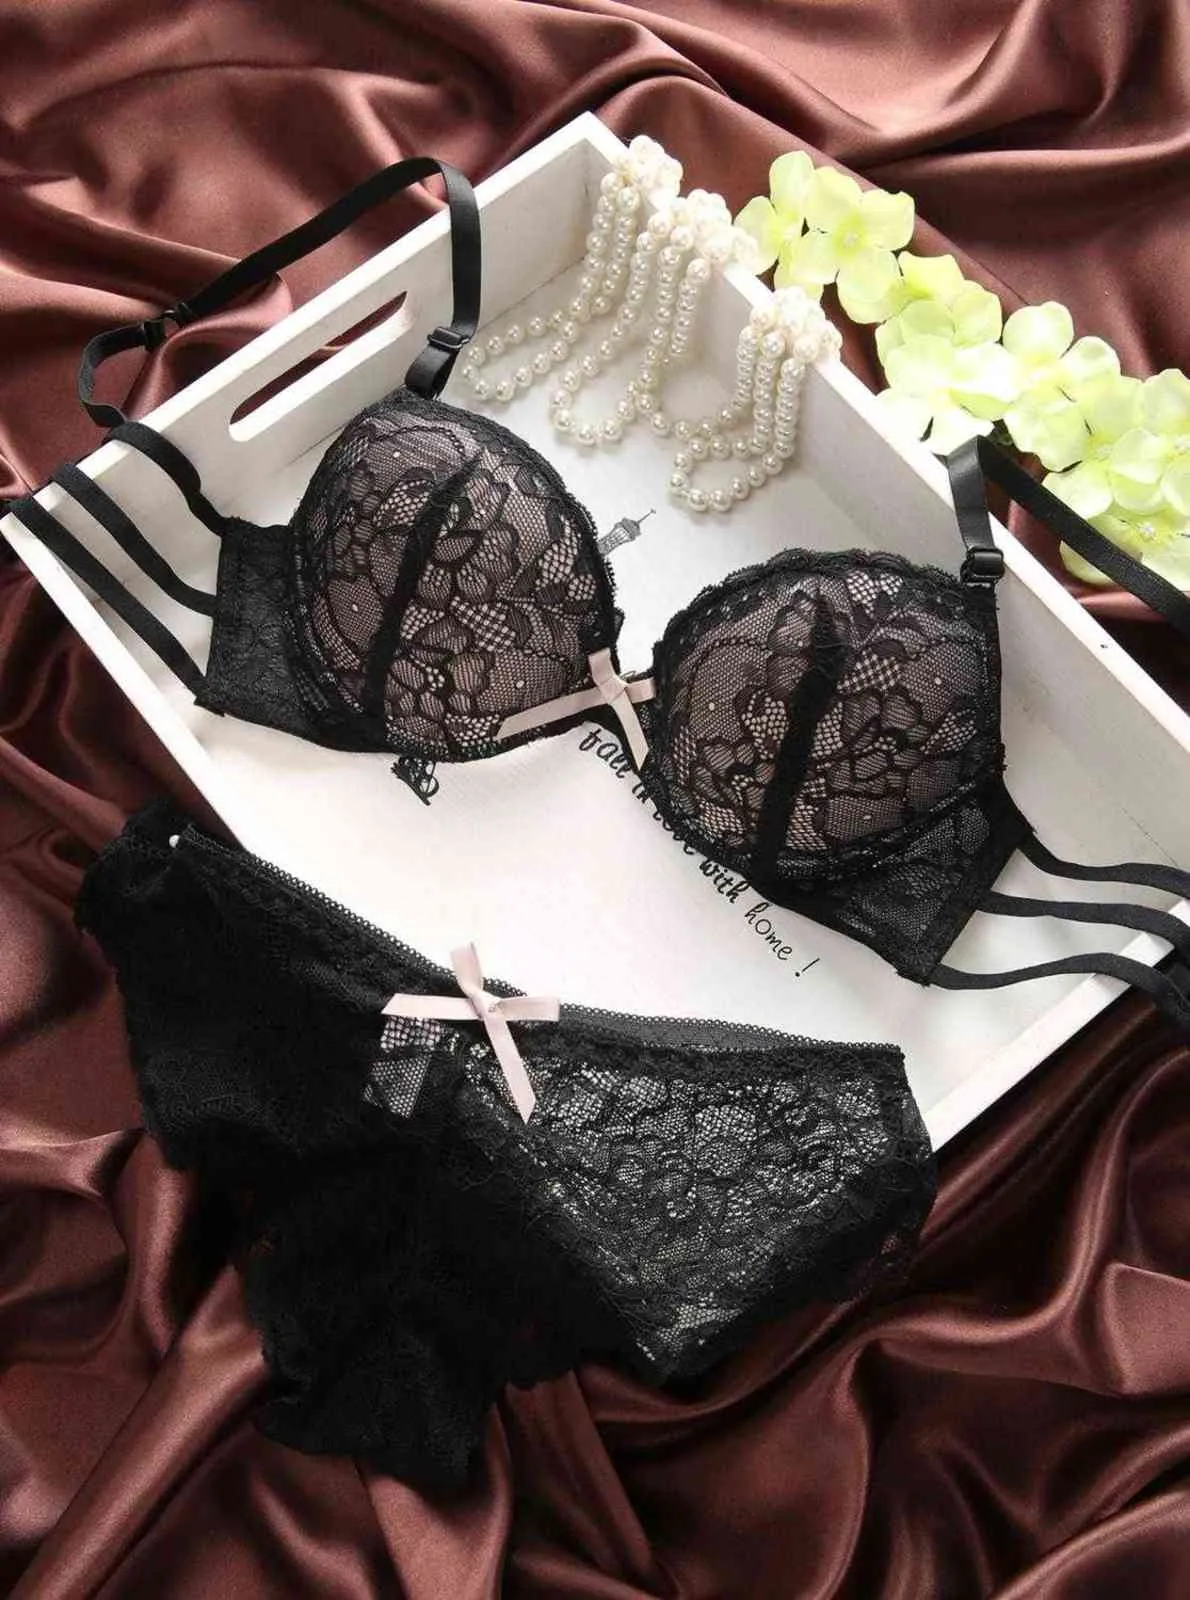 NXY sexy setBras set lace underwear sexy deep V brassiere thick lingerie push up bra panties s embroidery purple pink black women 1127